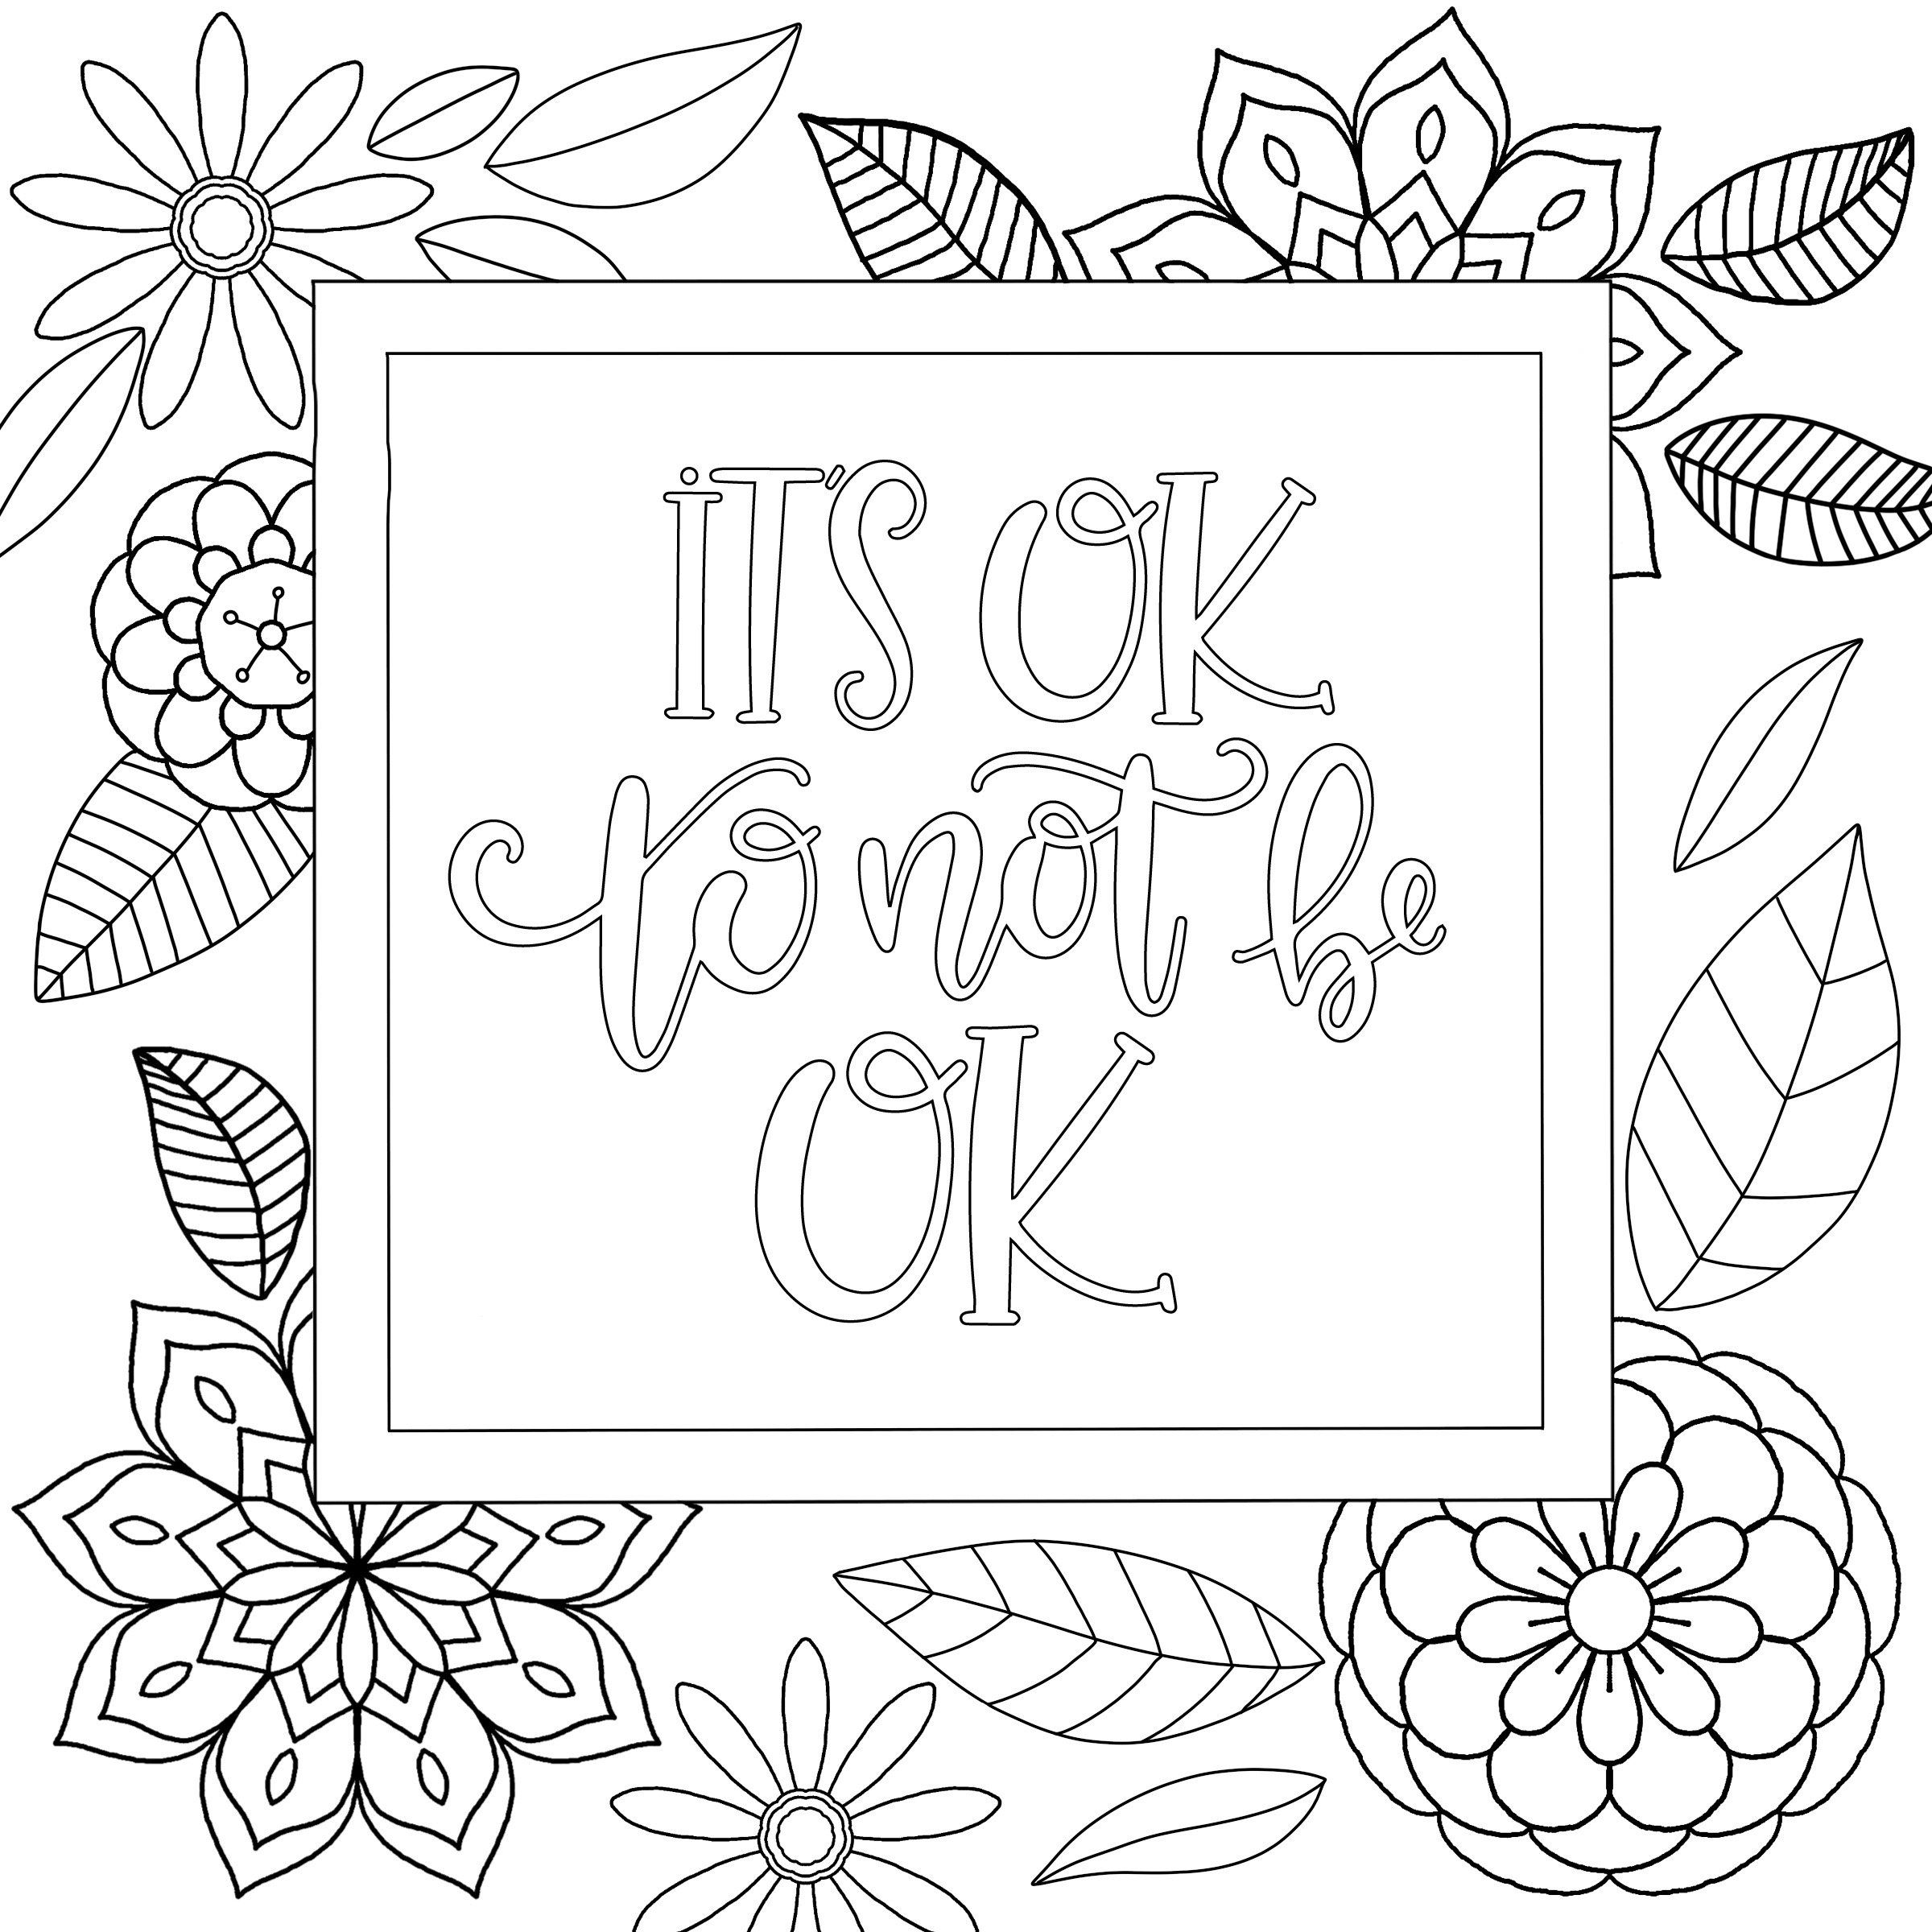 3 Motivational Printable Coloring Pages Zentangle Coloring | Etsy | Coloring  pages inspirational, Love coloring pages, Quote coloring pages